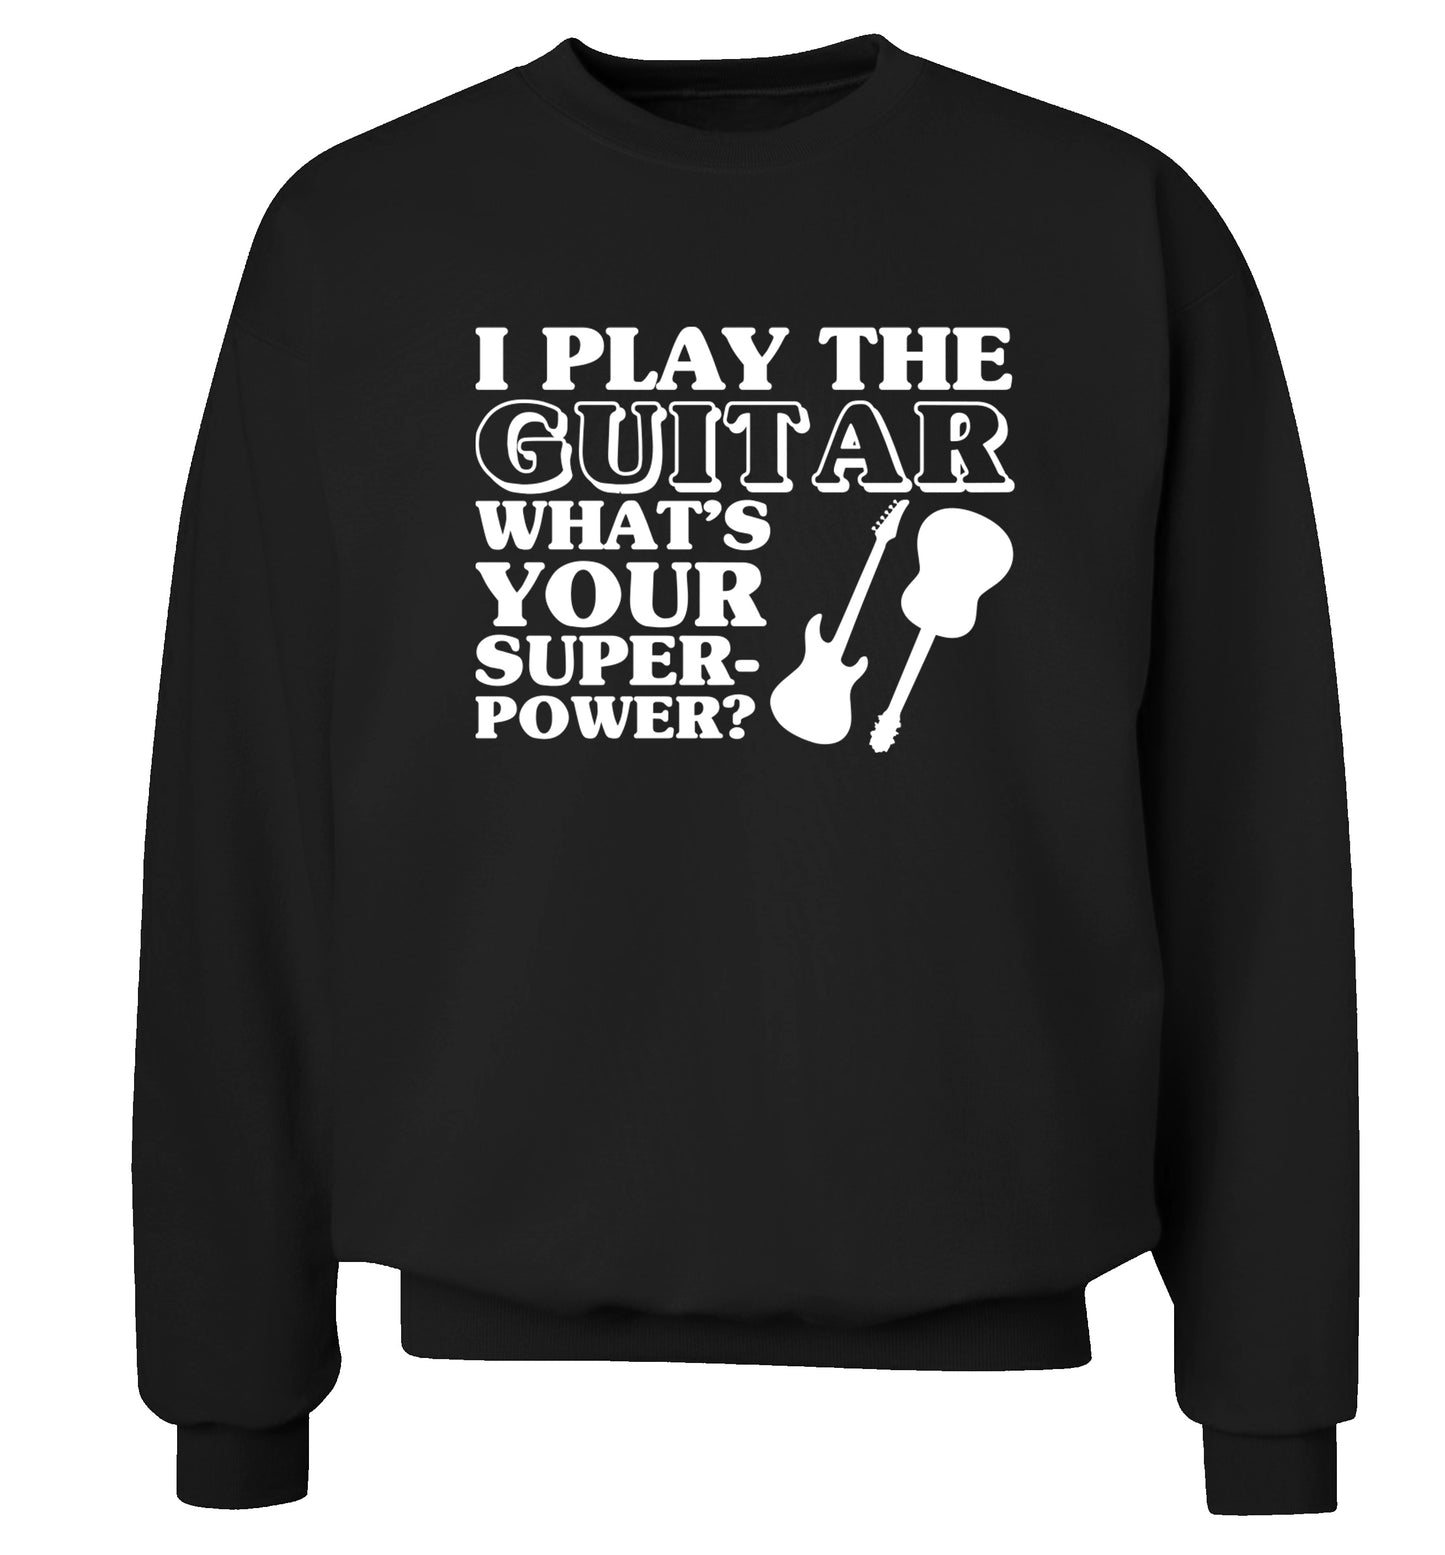 I play the guitar what's your superpower? Adult's unisex black Sweater XS